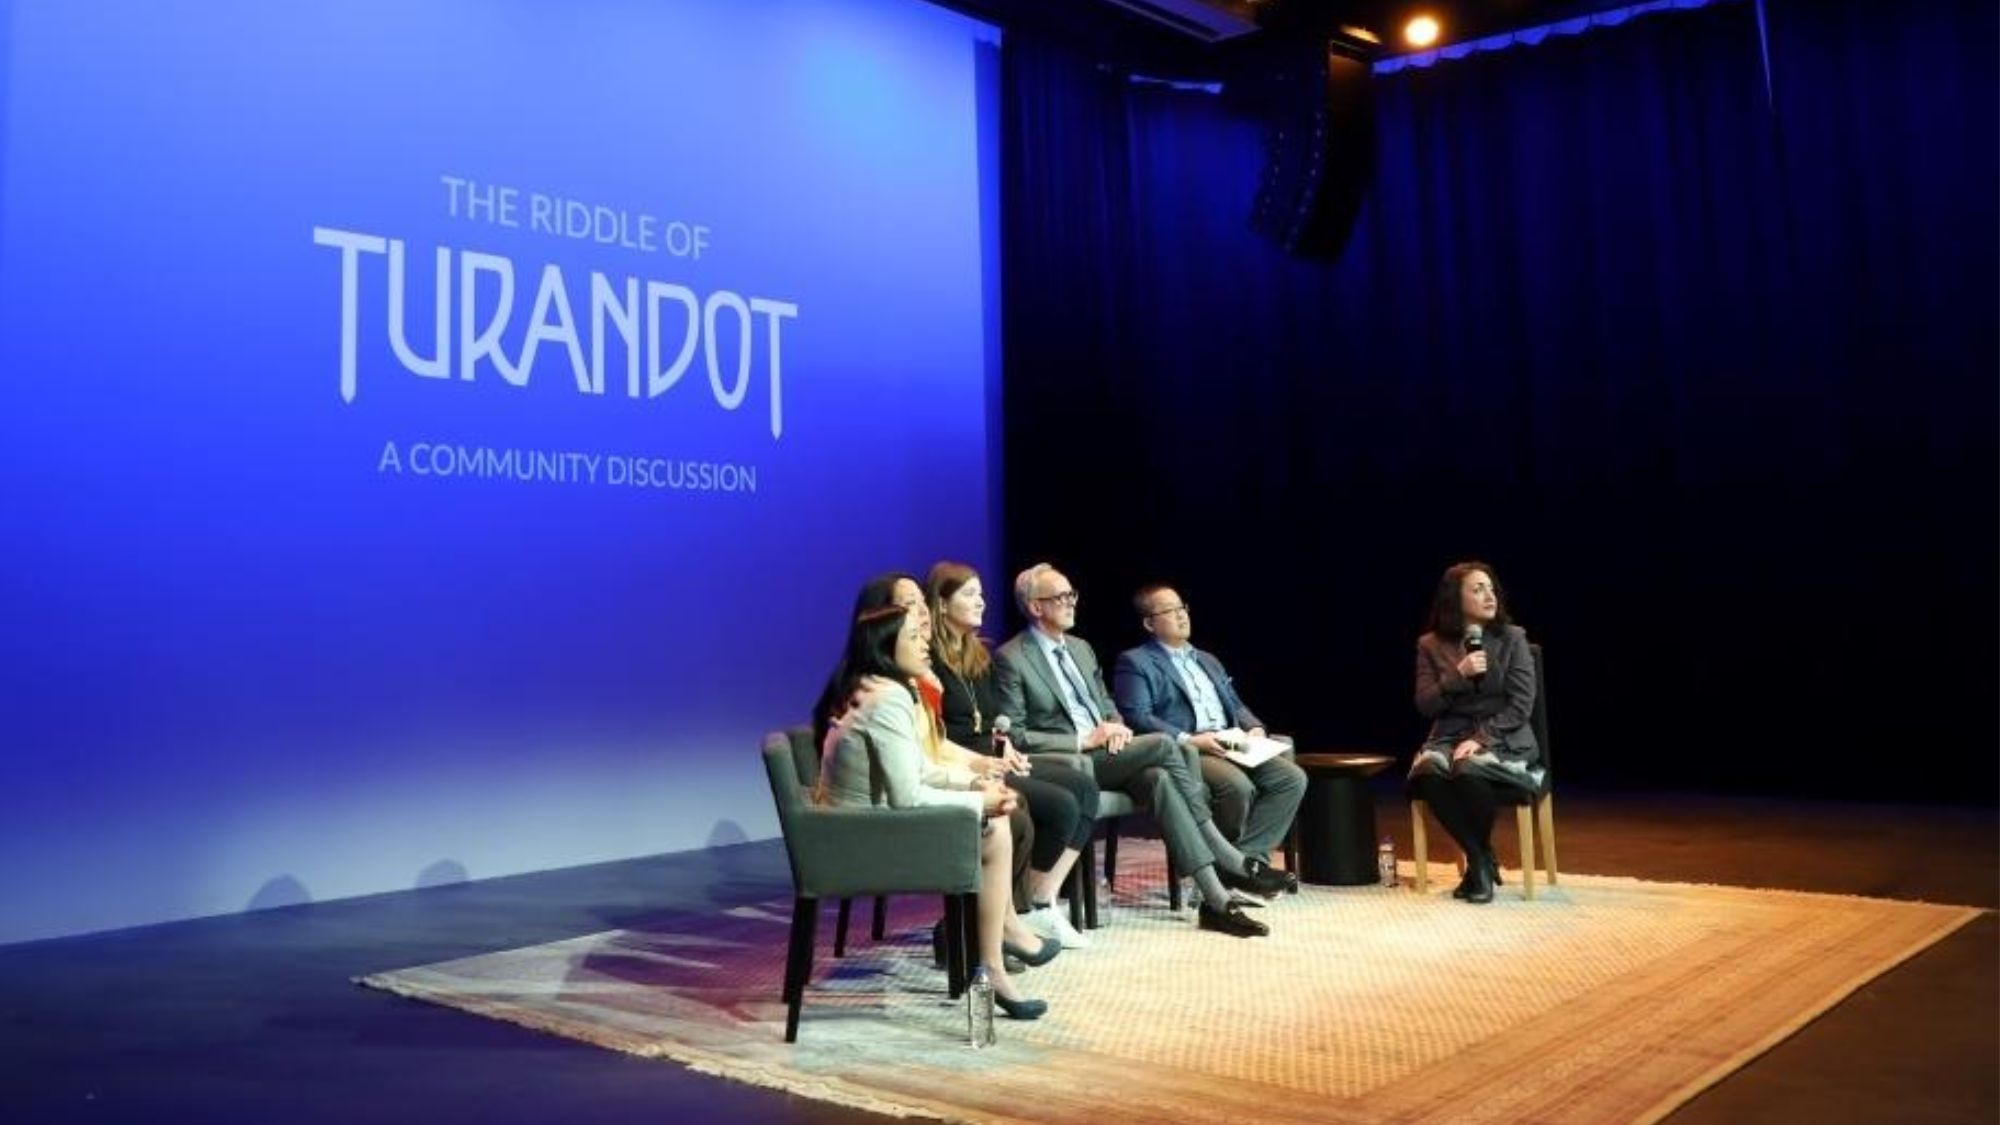 Six people sit in a row on a stage in front of a blue background with text saying "The Riddle of Turandot: A Community Discussion